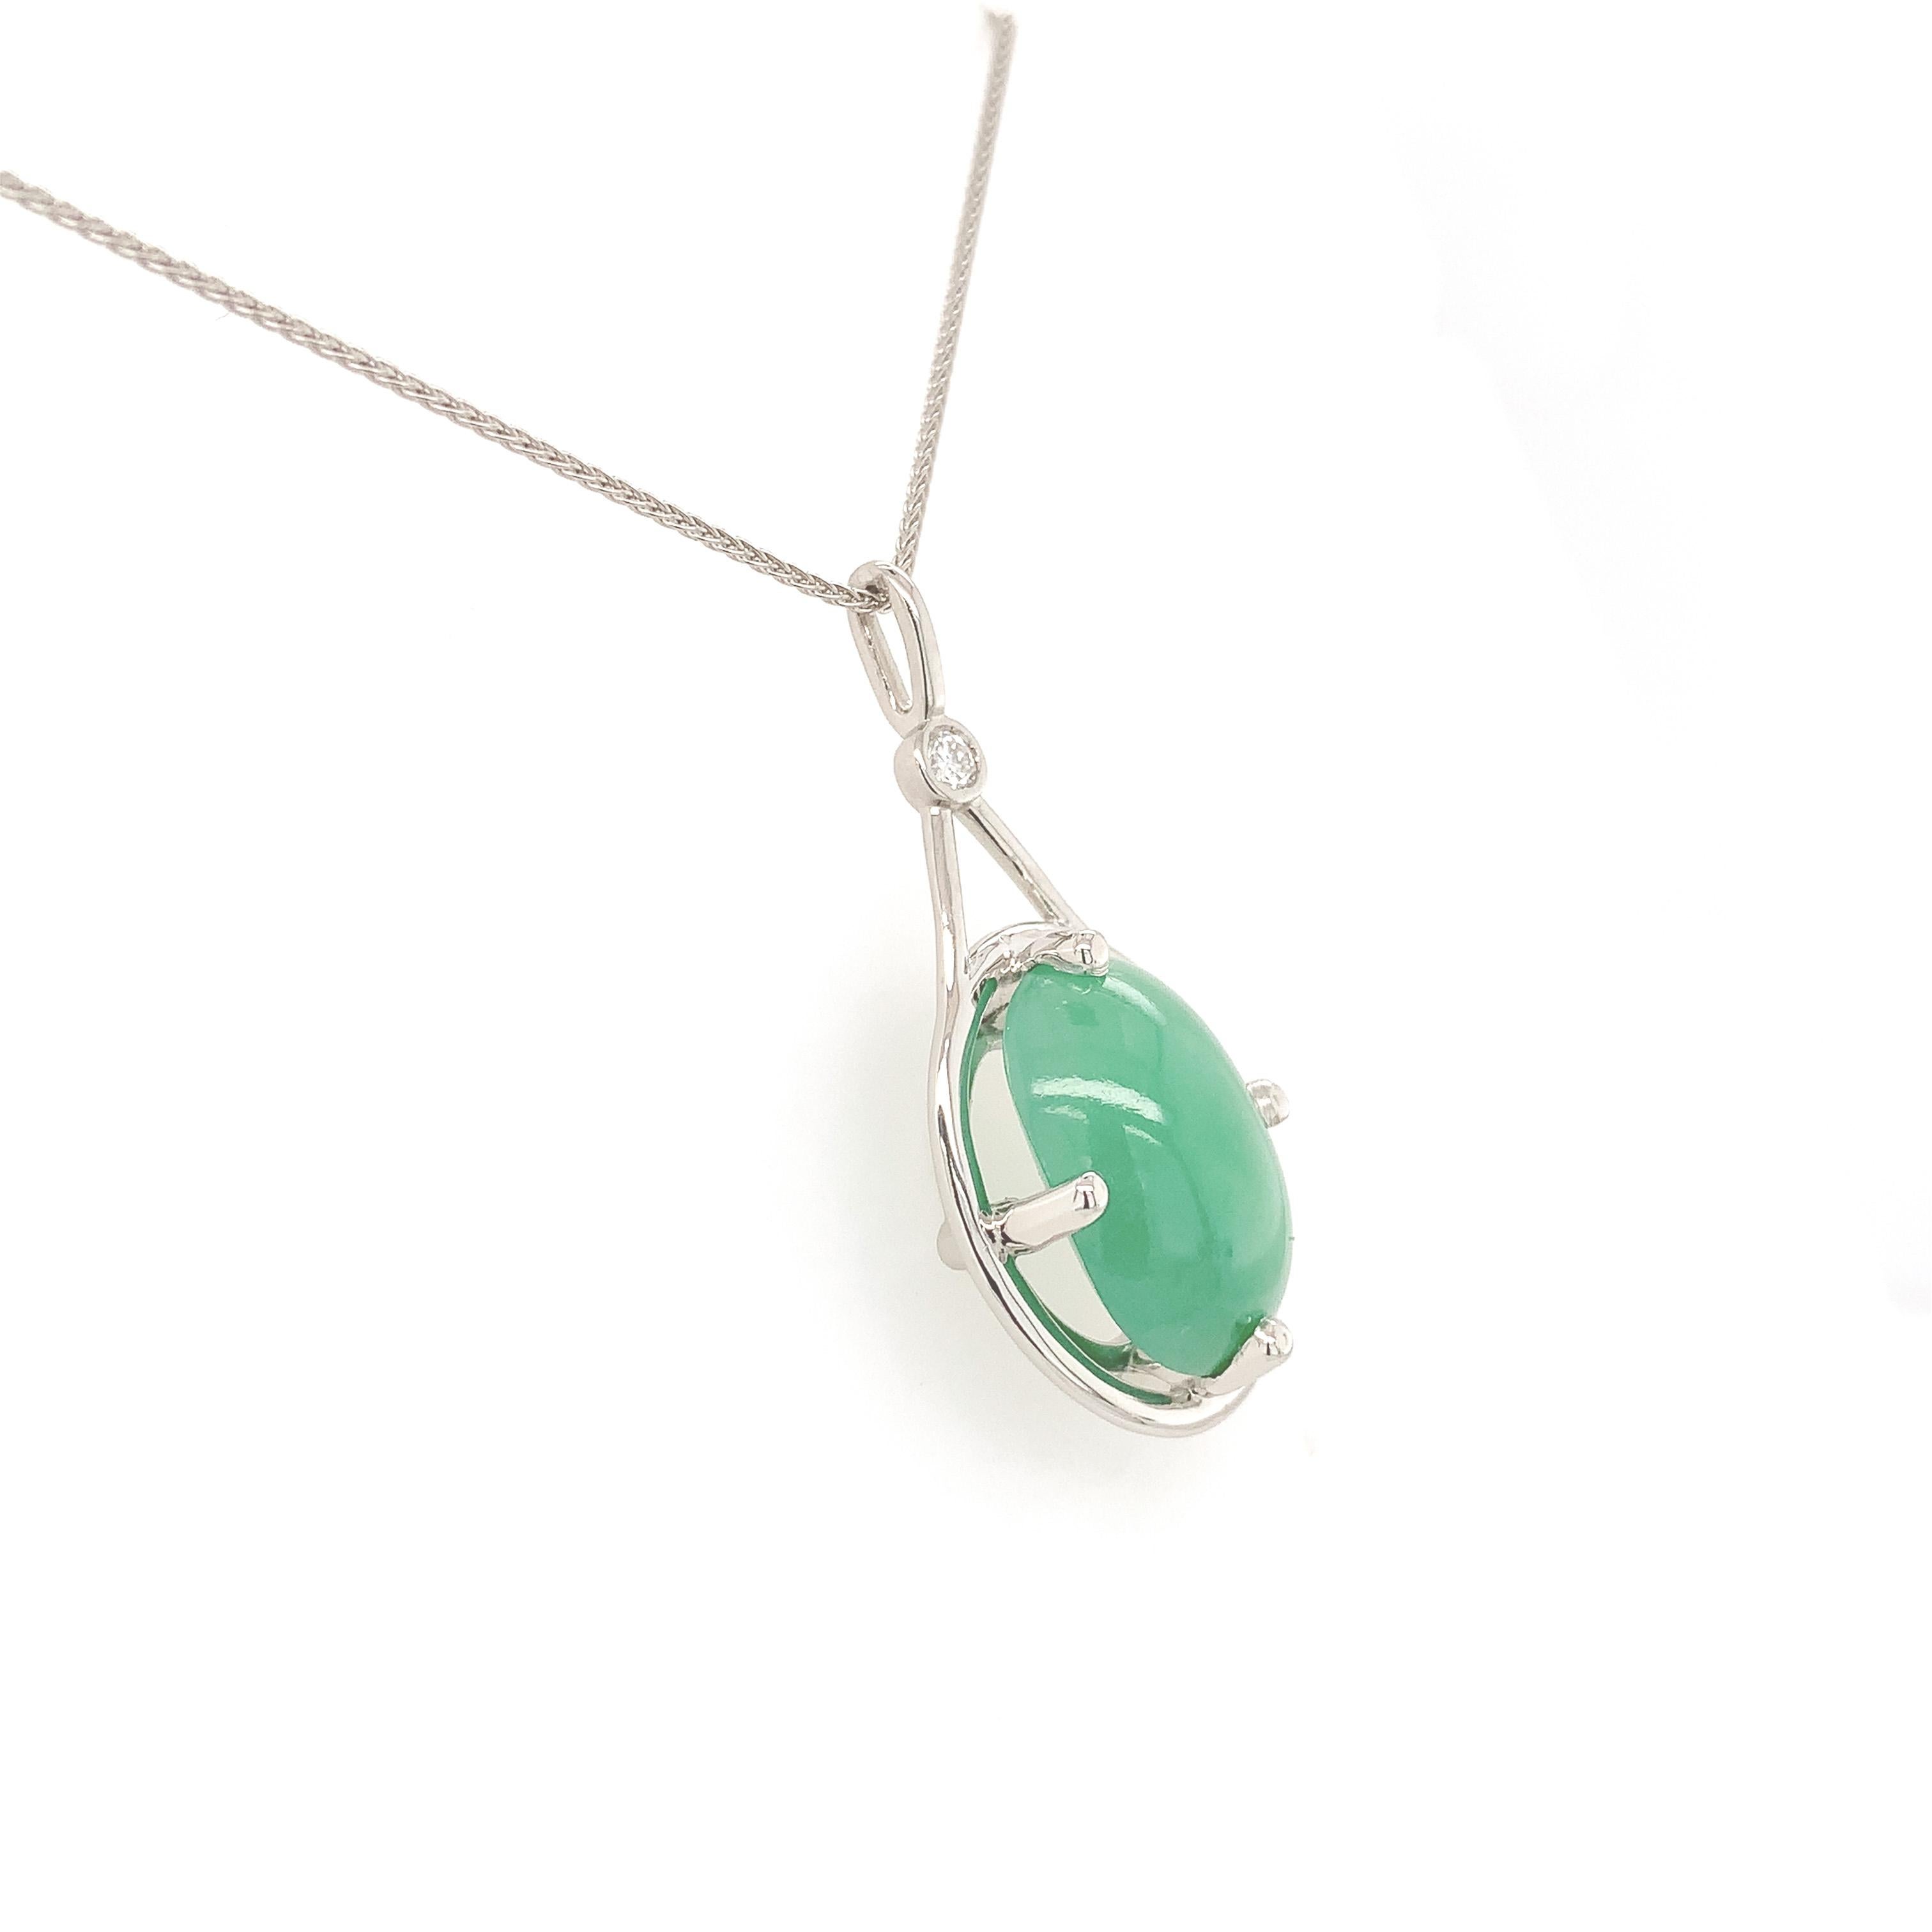 Platinum pendant featuring a large oval green jadeite jade cabochon weighing 9.55 carats. The jade has a GIA report #5234070884 stating natural jadeite grade A, not dyed. The jade measures 15.8mmx x11.04mm x 6.83mm and is translucent with green